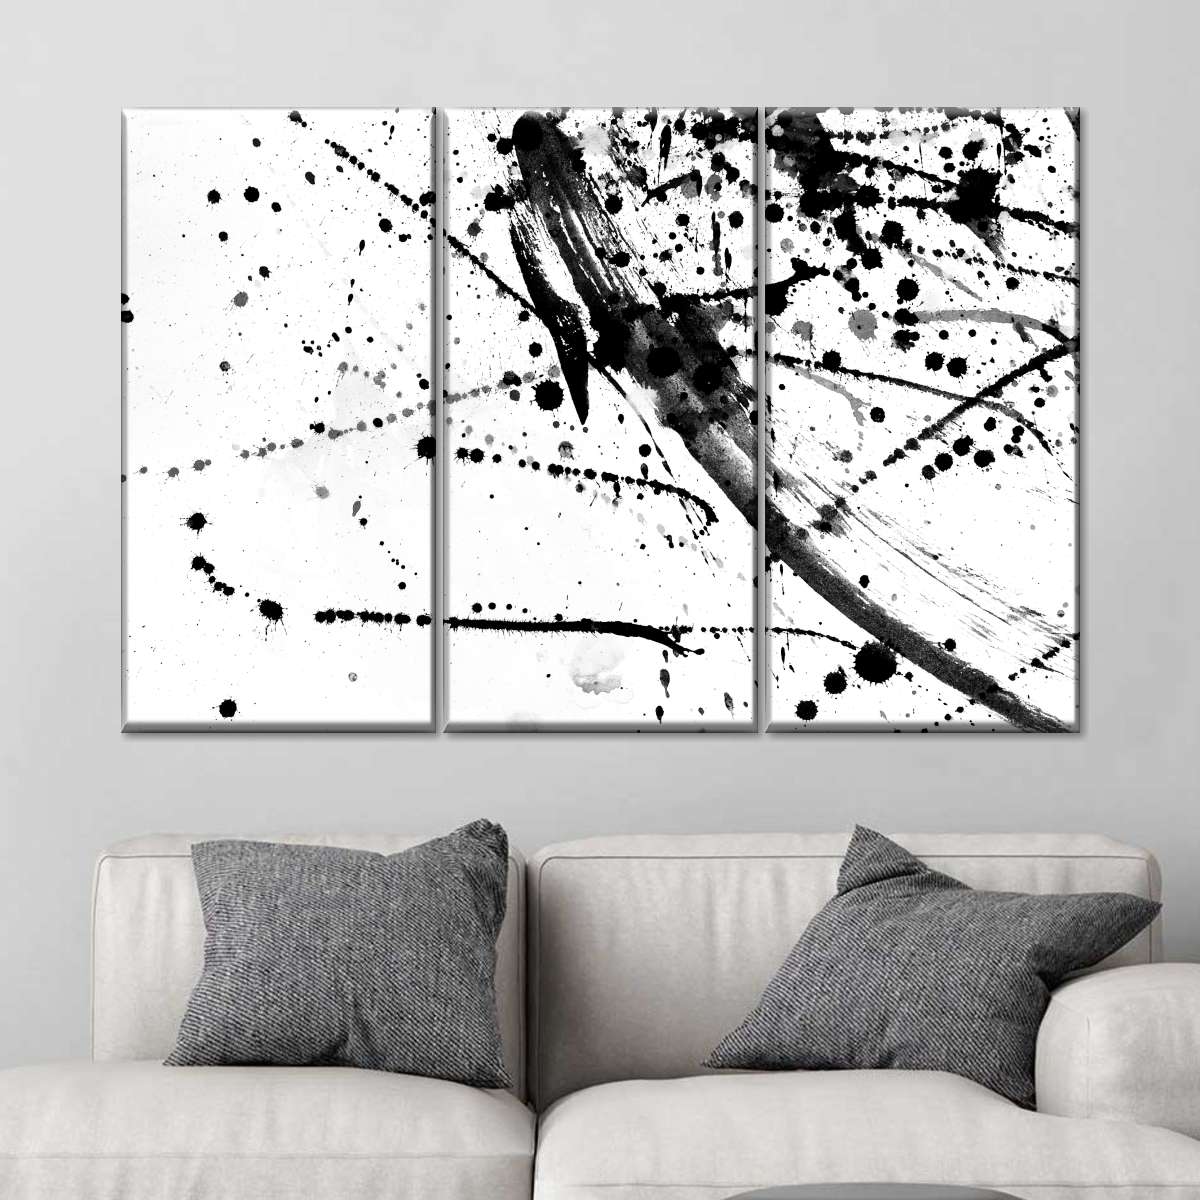 abstract designs black and white